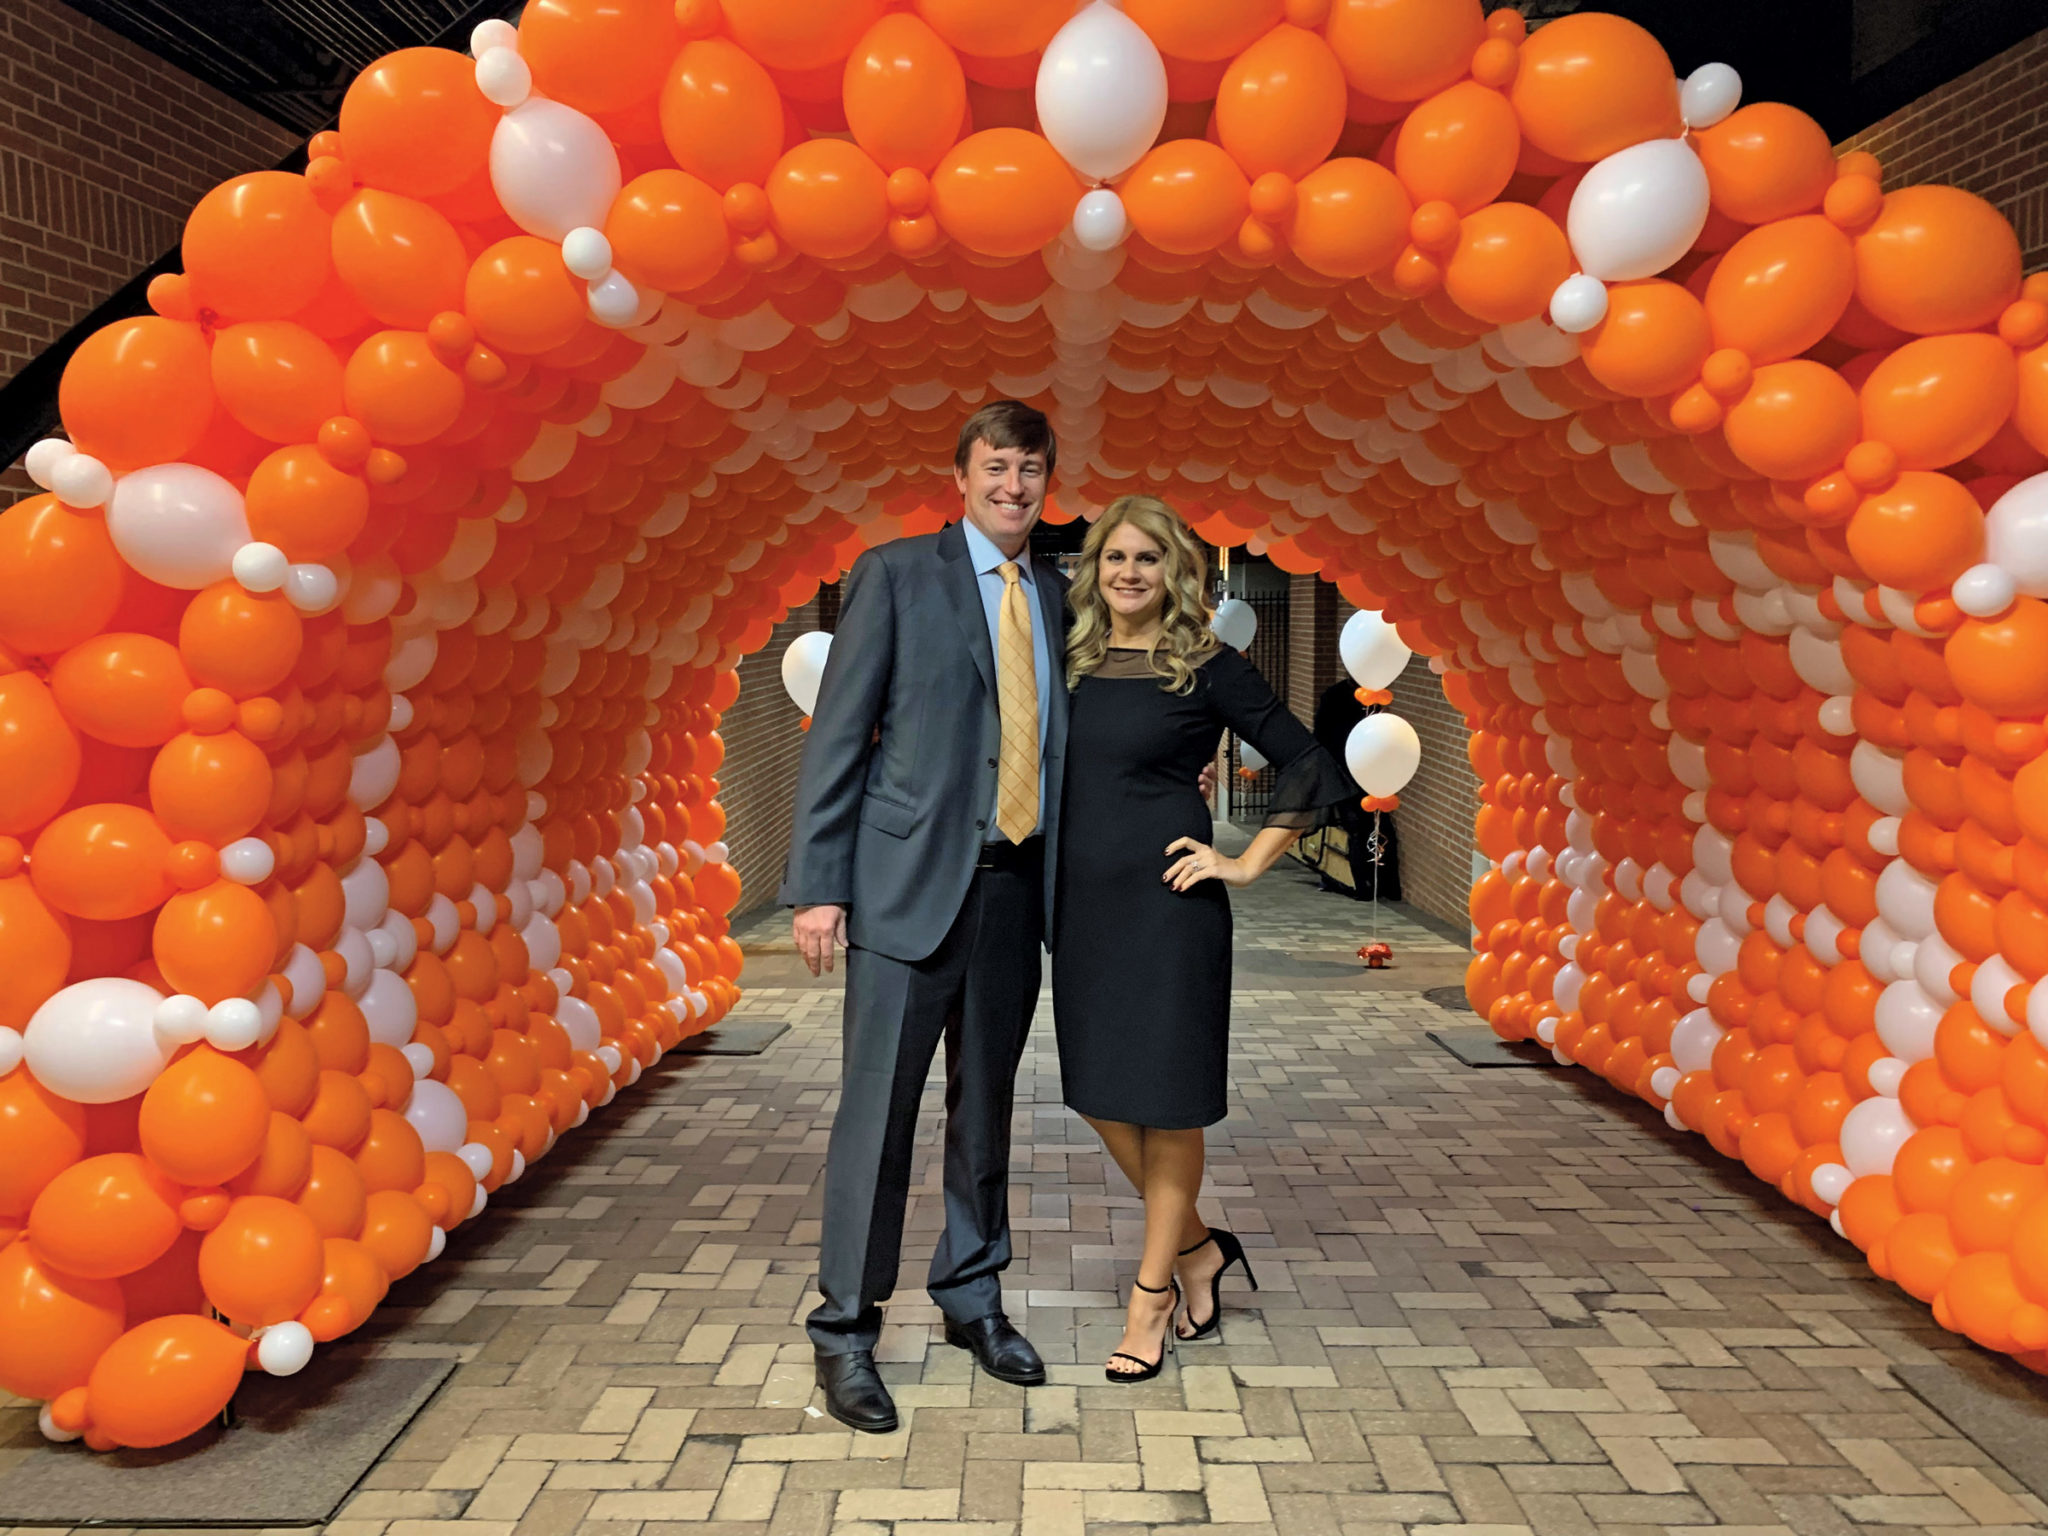 Ross and Sara Croley stand under an orange and white balloon arch at Neyland Stadium